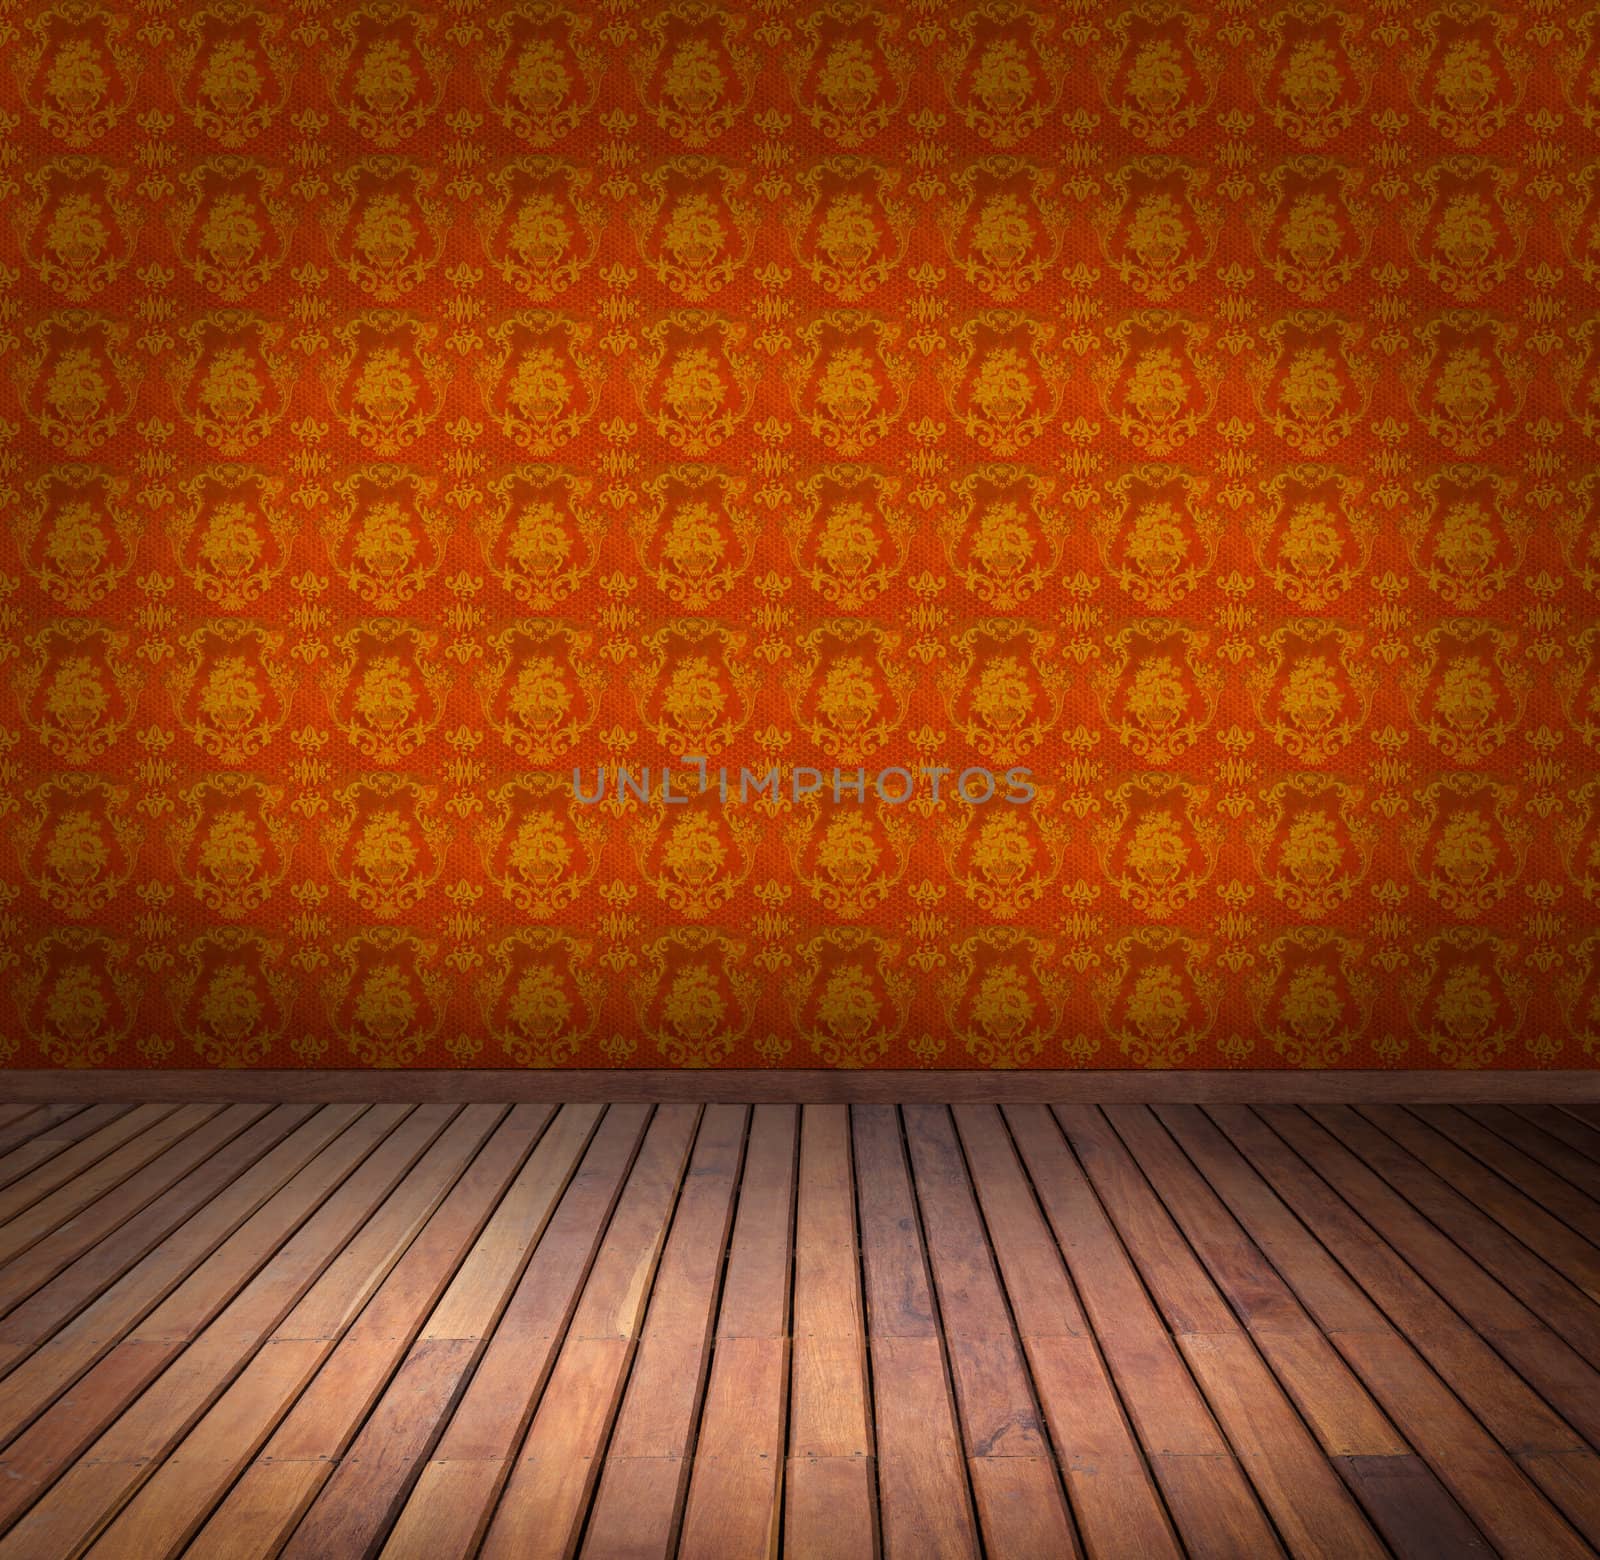 yellow wallpaper room by tungphoto